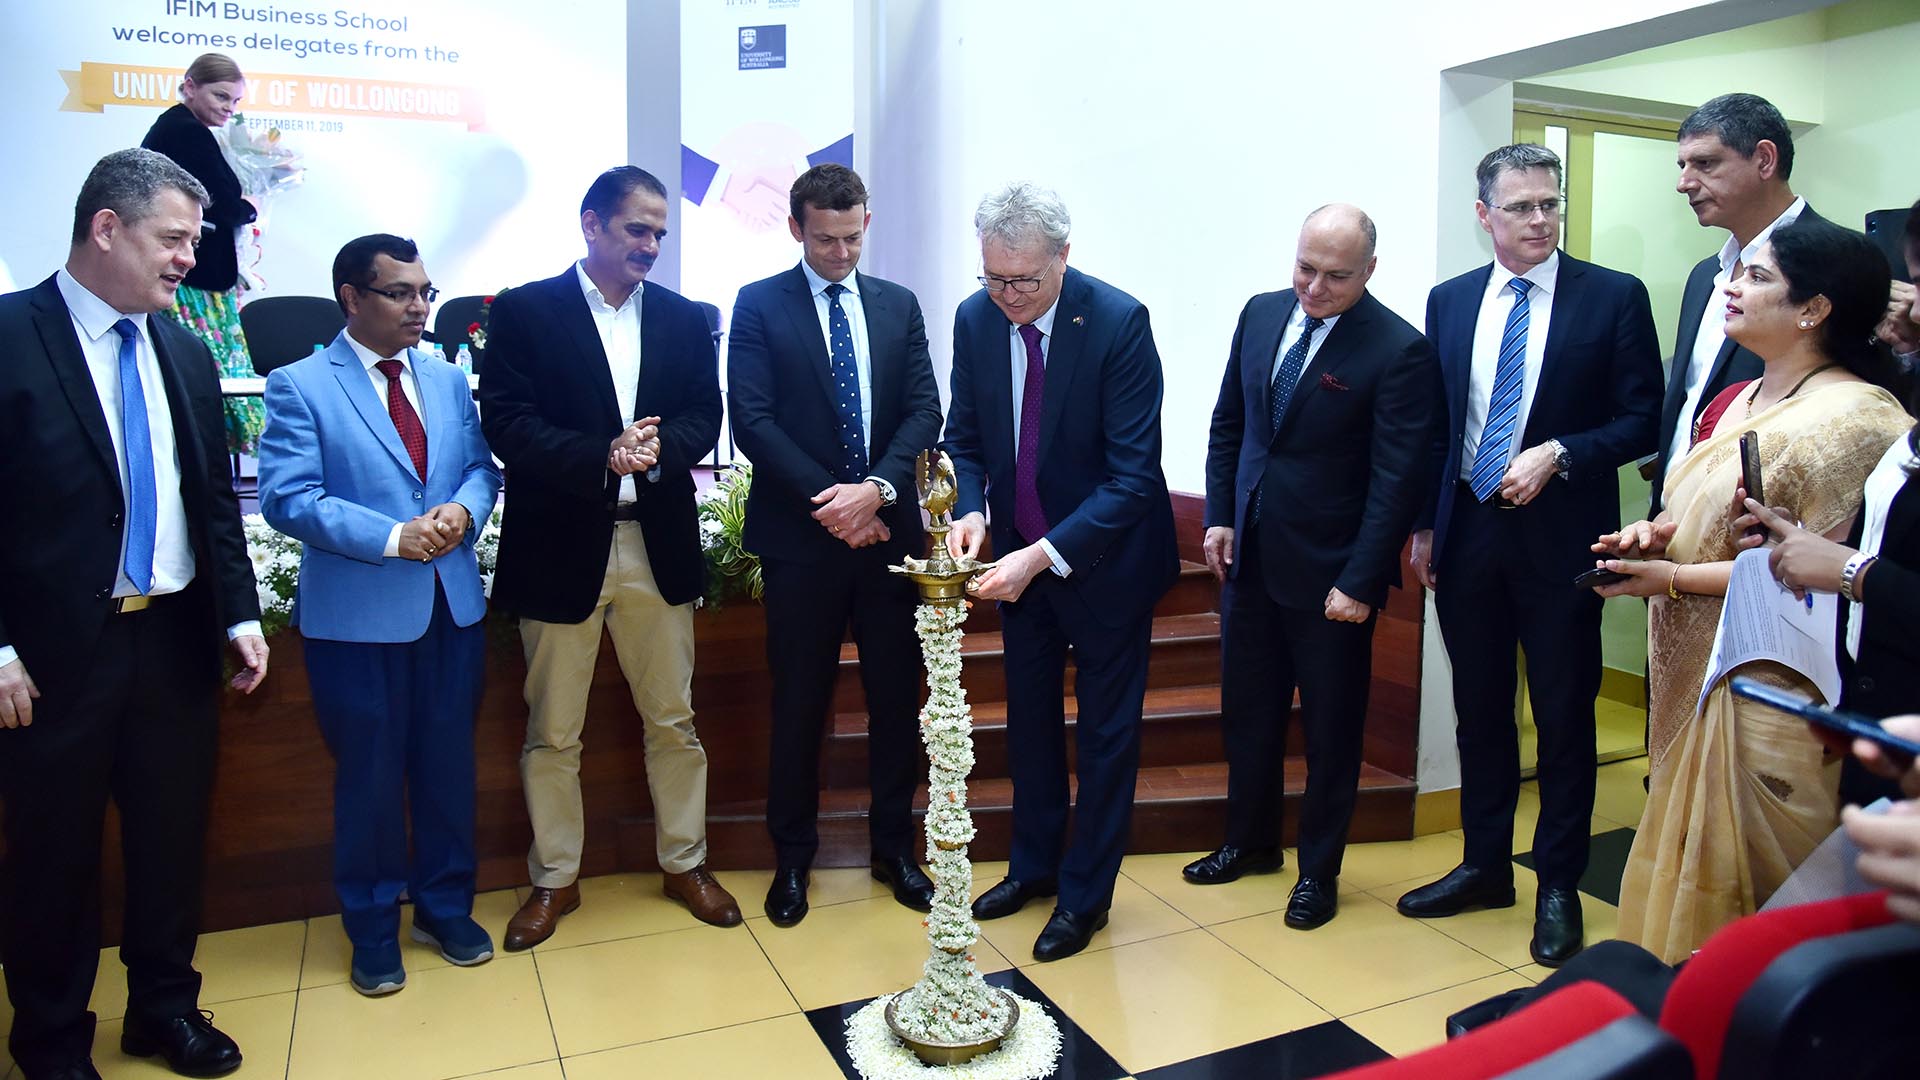 Representatives fromm UOW and IFIM Business School in India at a ceremony